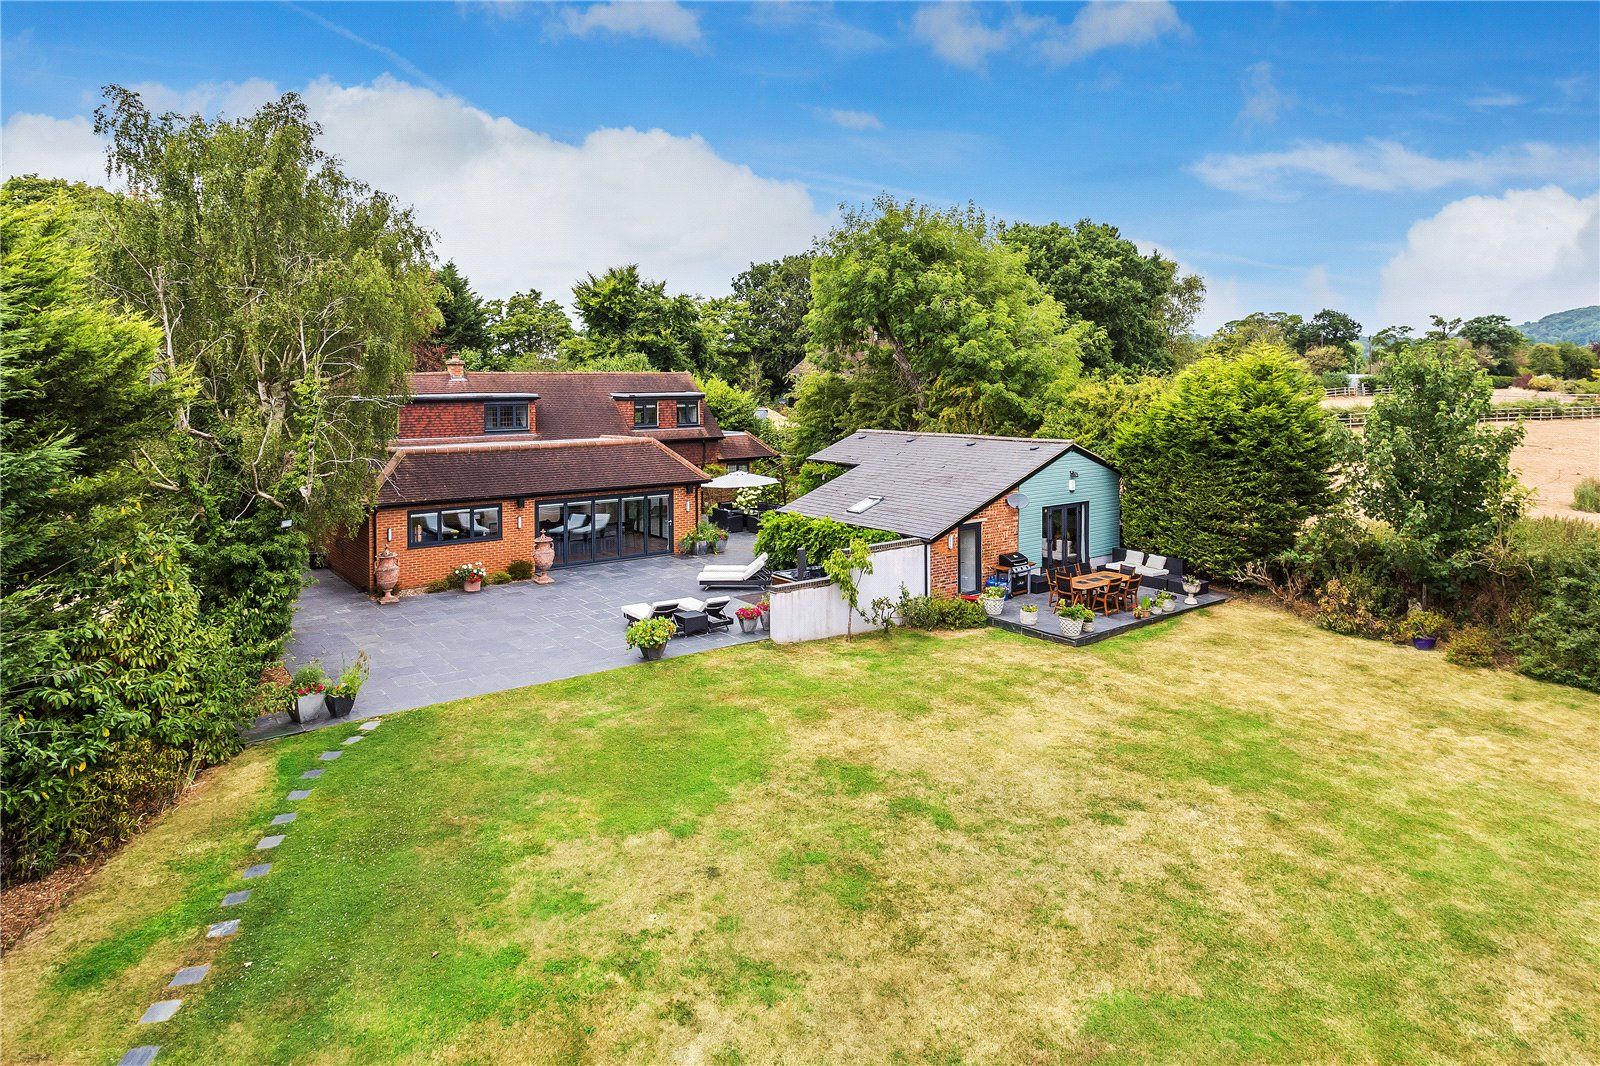 6 bed detached house for sale in Church Lane, Godstone, Surrey RH9 - Zoopla